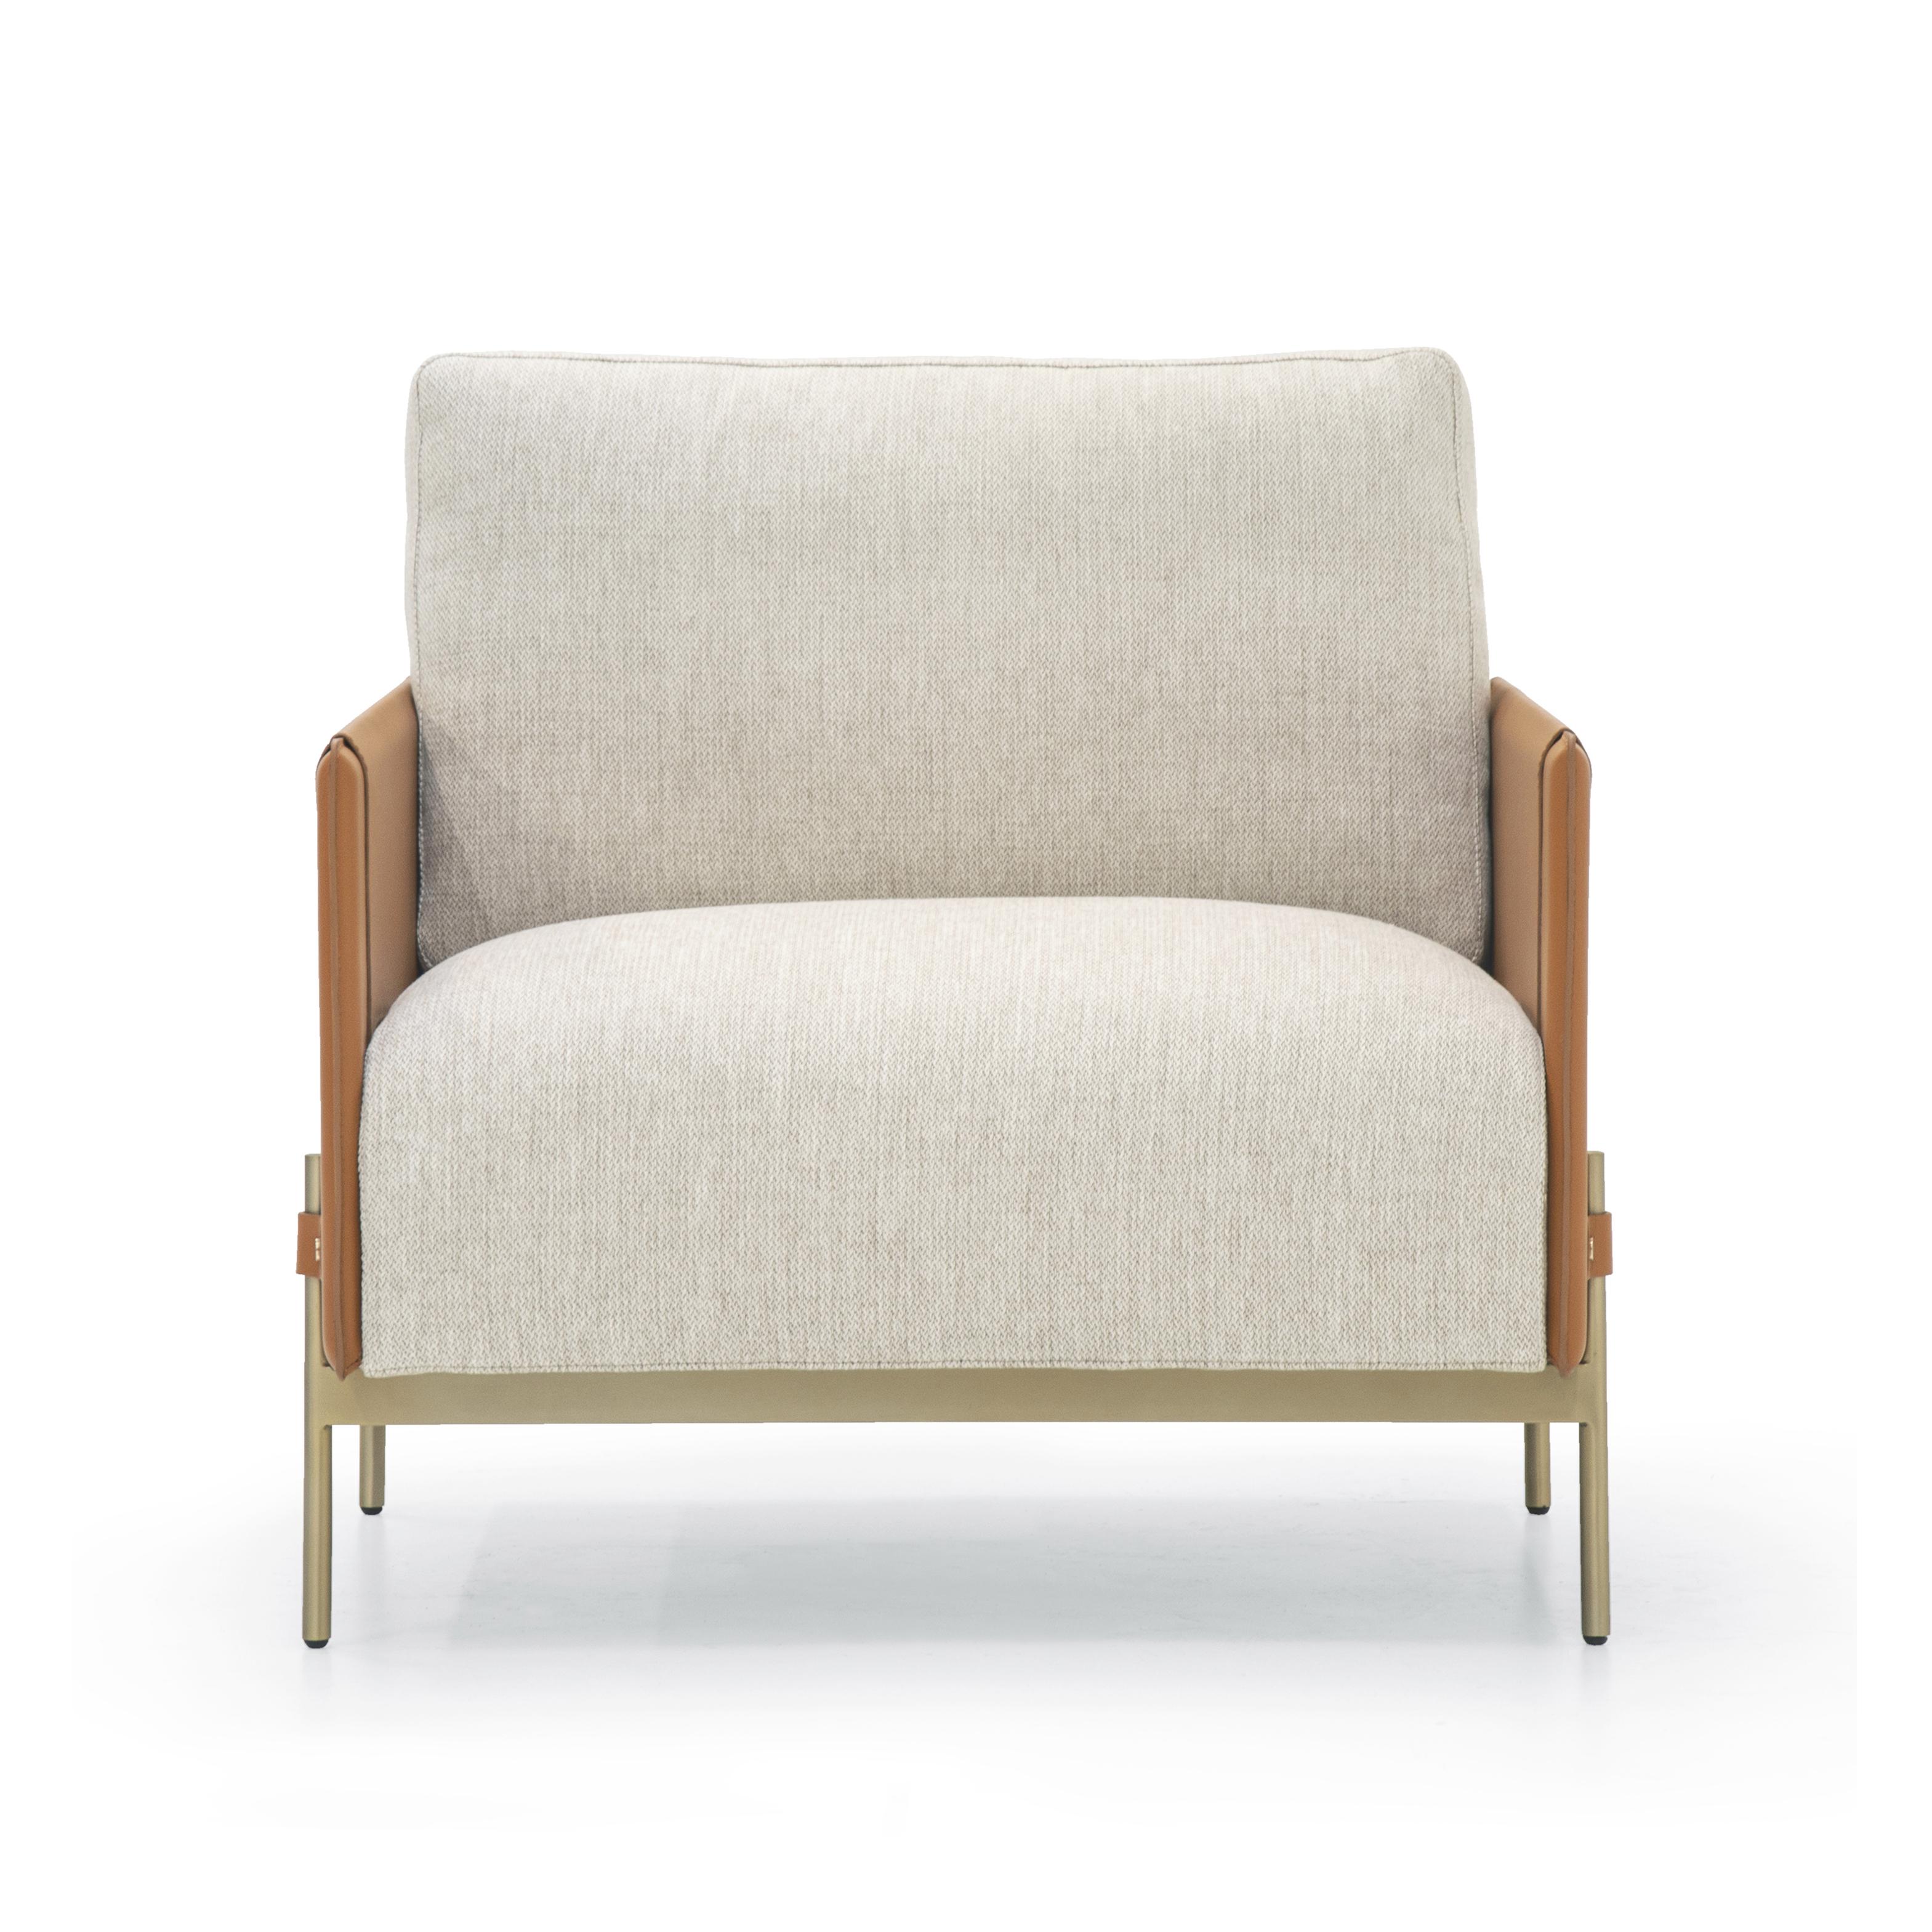 Other Contemporary Design, Iconic Armchair in Natural Saddle Leather V215 For Sale